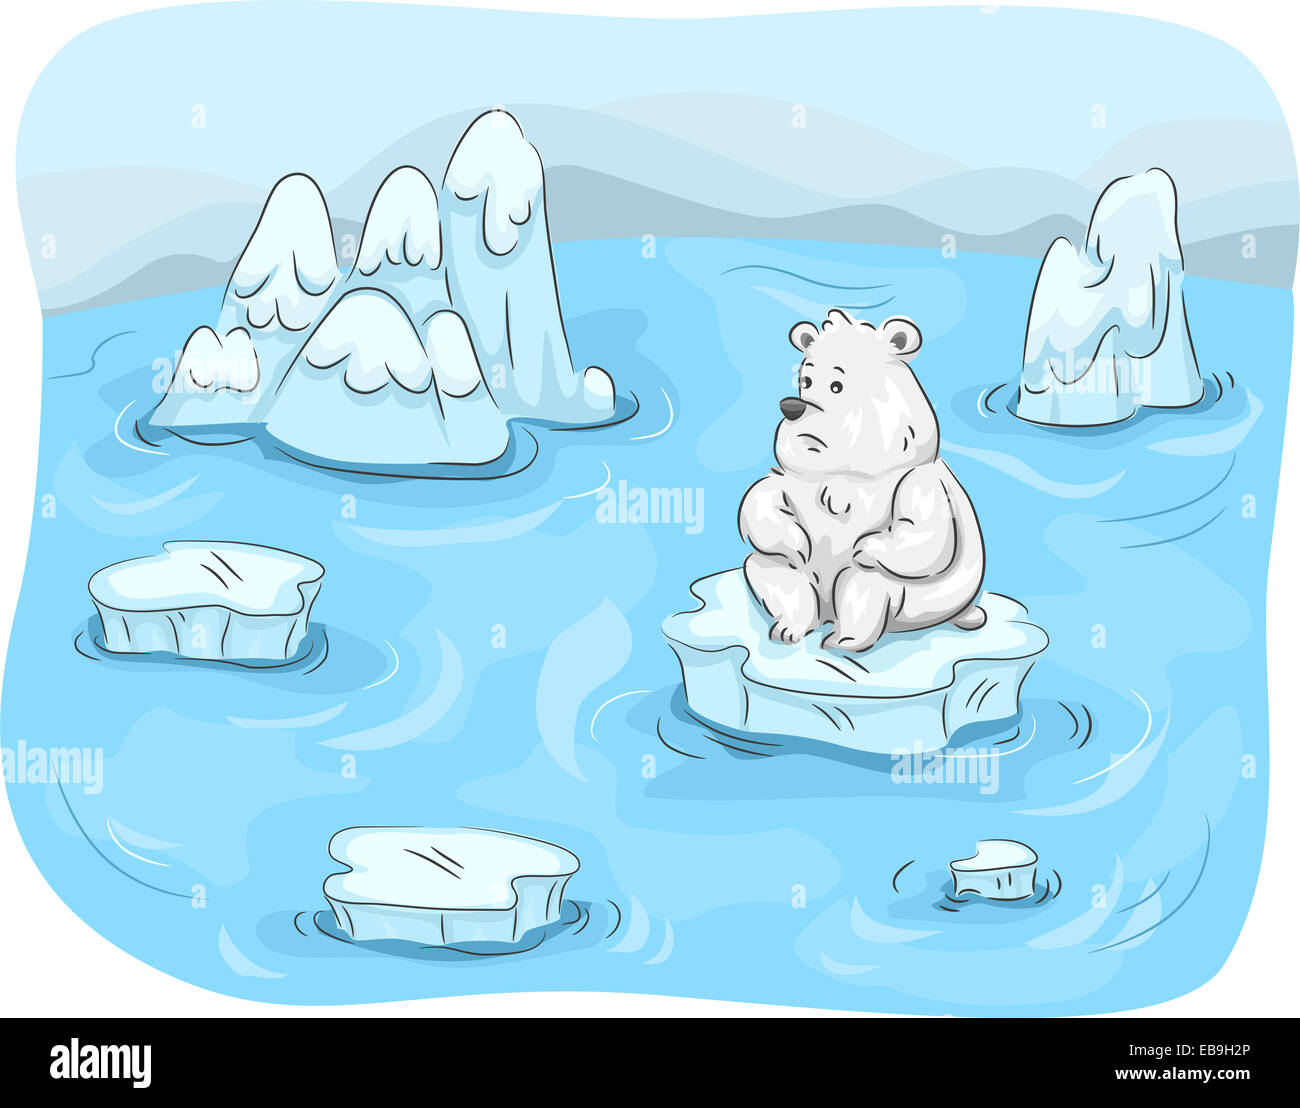 Mascot Illustration Featuring a Polar Bear Surrounded by Melting Ice Stock Photo